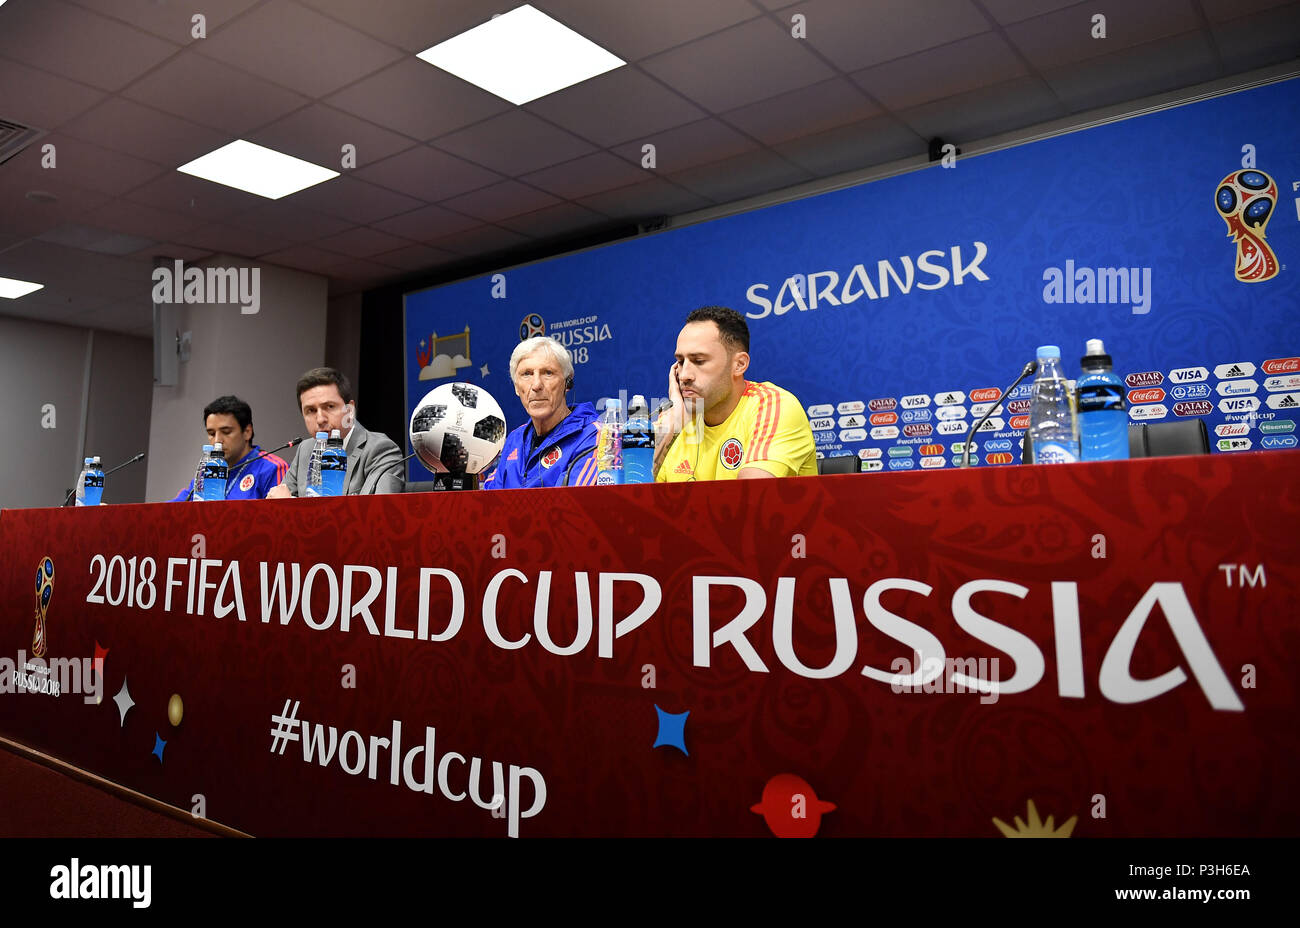 (180618) -- SARANSK, June 18, 2018(Xinhua) -- Colombian head coach Jose Pekerman (2nd R) and goalkeeper David Ospina (1st R) attend a press conference during the 2018 FIFA World Cup in Saransk, Russia, on June 18, 2018. (Xinhua/He Canling) Stock Photo